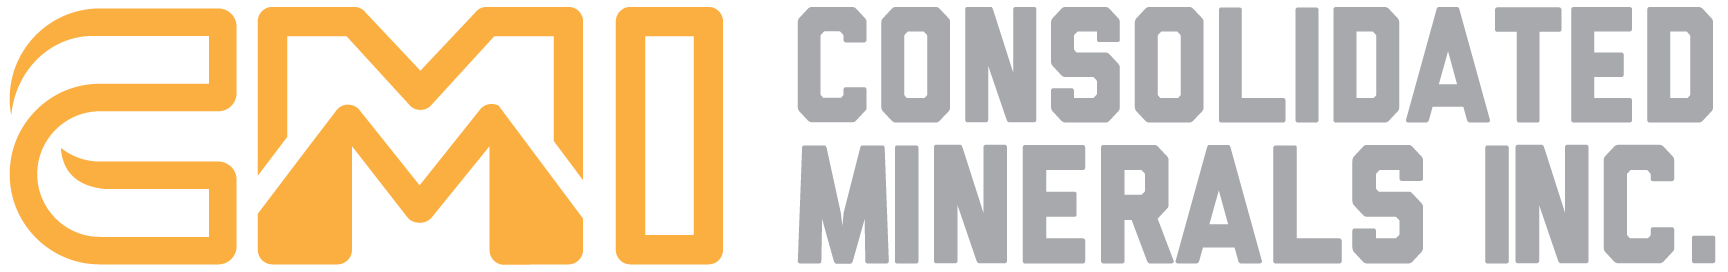 Consolidated Minerals